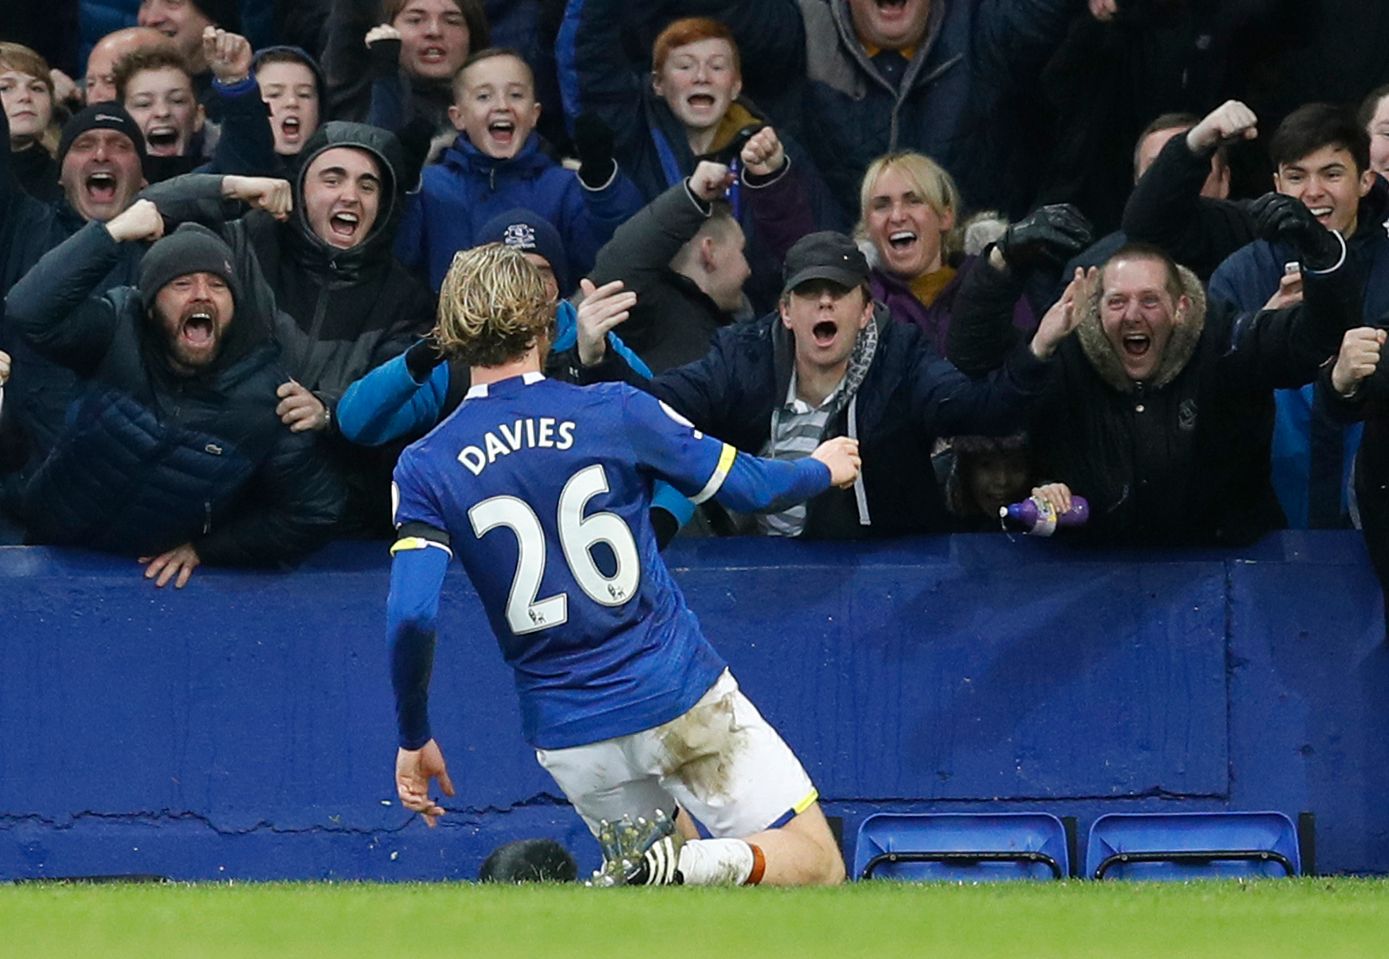 Britain Soccer Football - Everton v Manchester City - Premier League - Goodison Park - 15/1/17 Everton's Tom Davies celebrates scoring their third goal with fans Reuters / Darren Staples Livepic EDITORIAL USE ONLY. No use with unauthorized audio, video, data, fixture lists, club/league logos or 